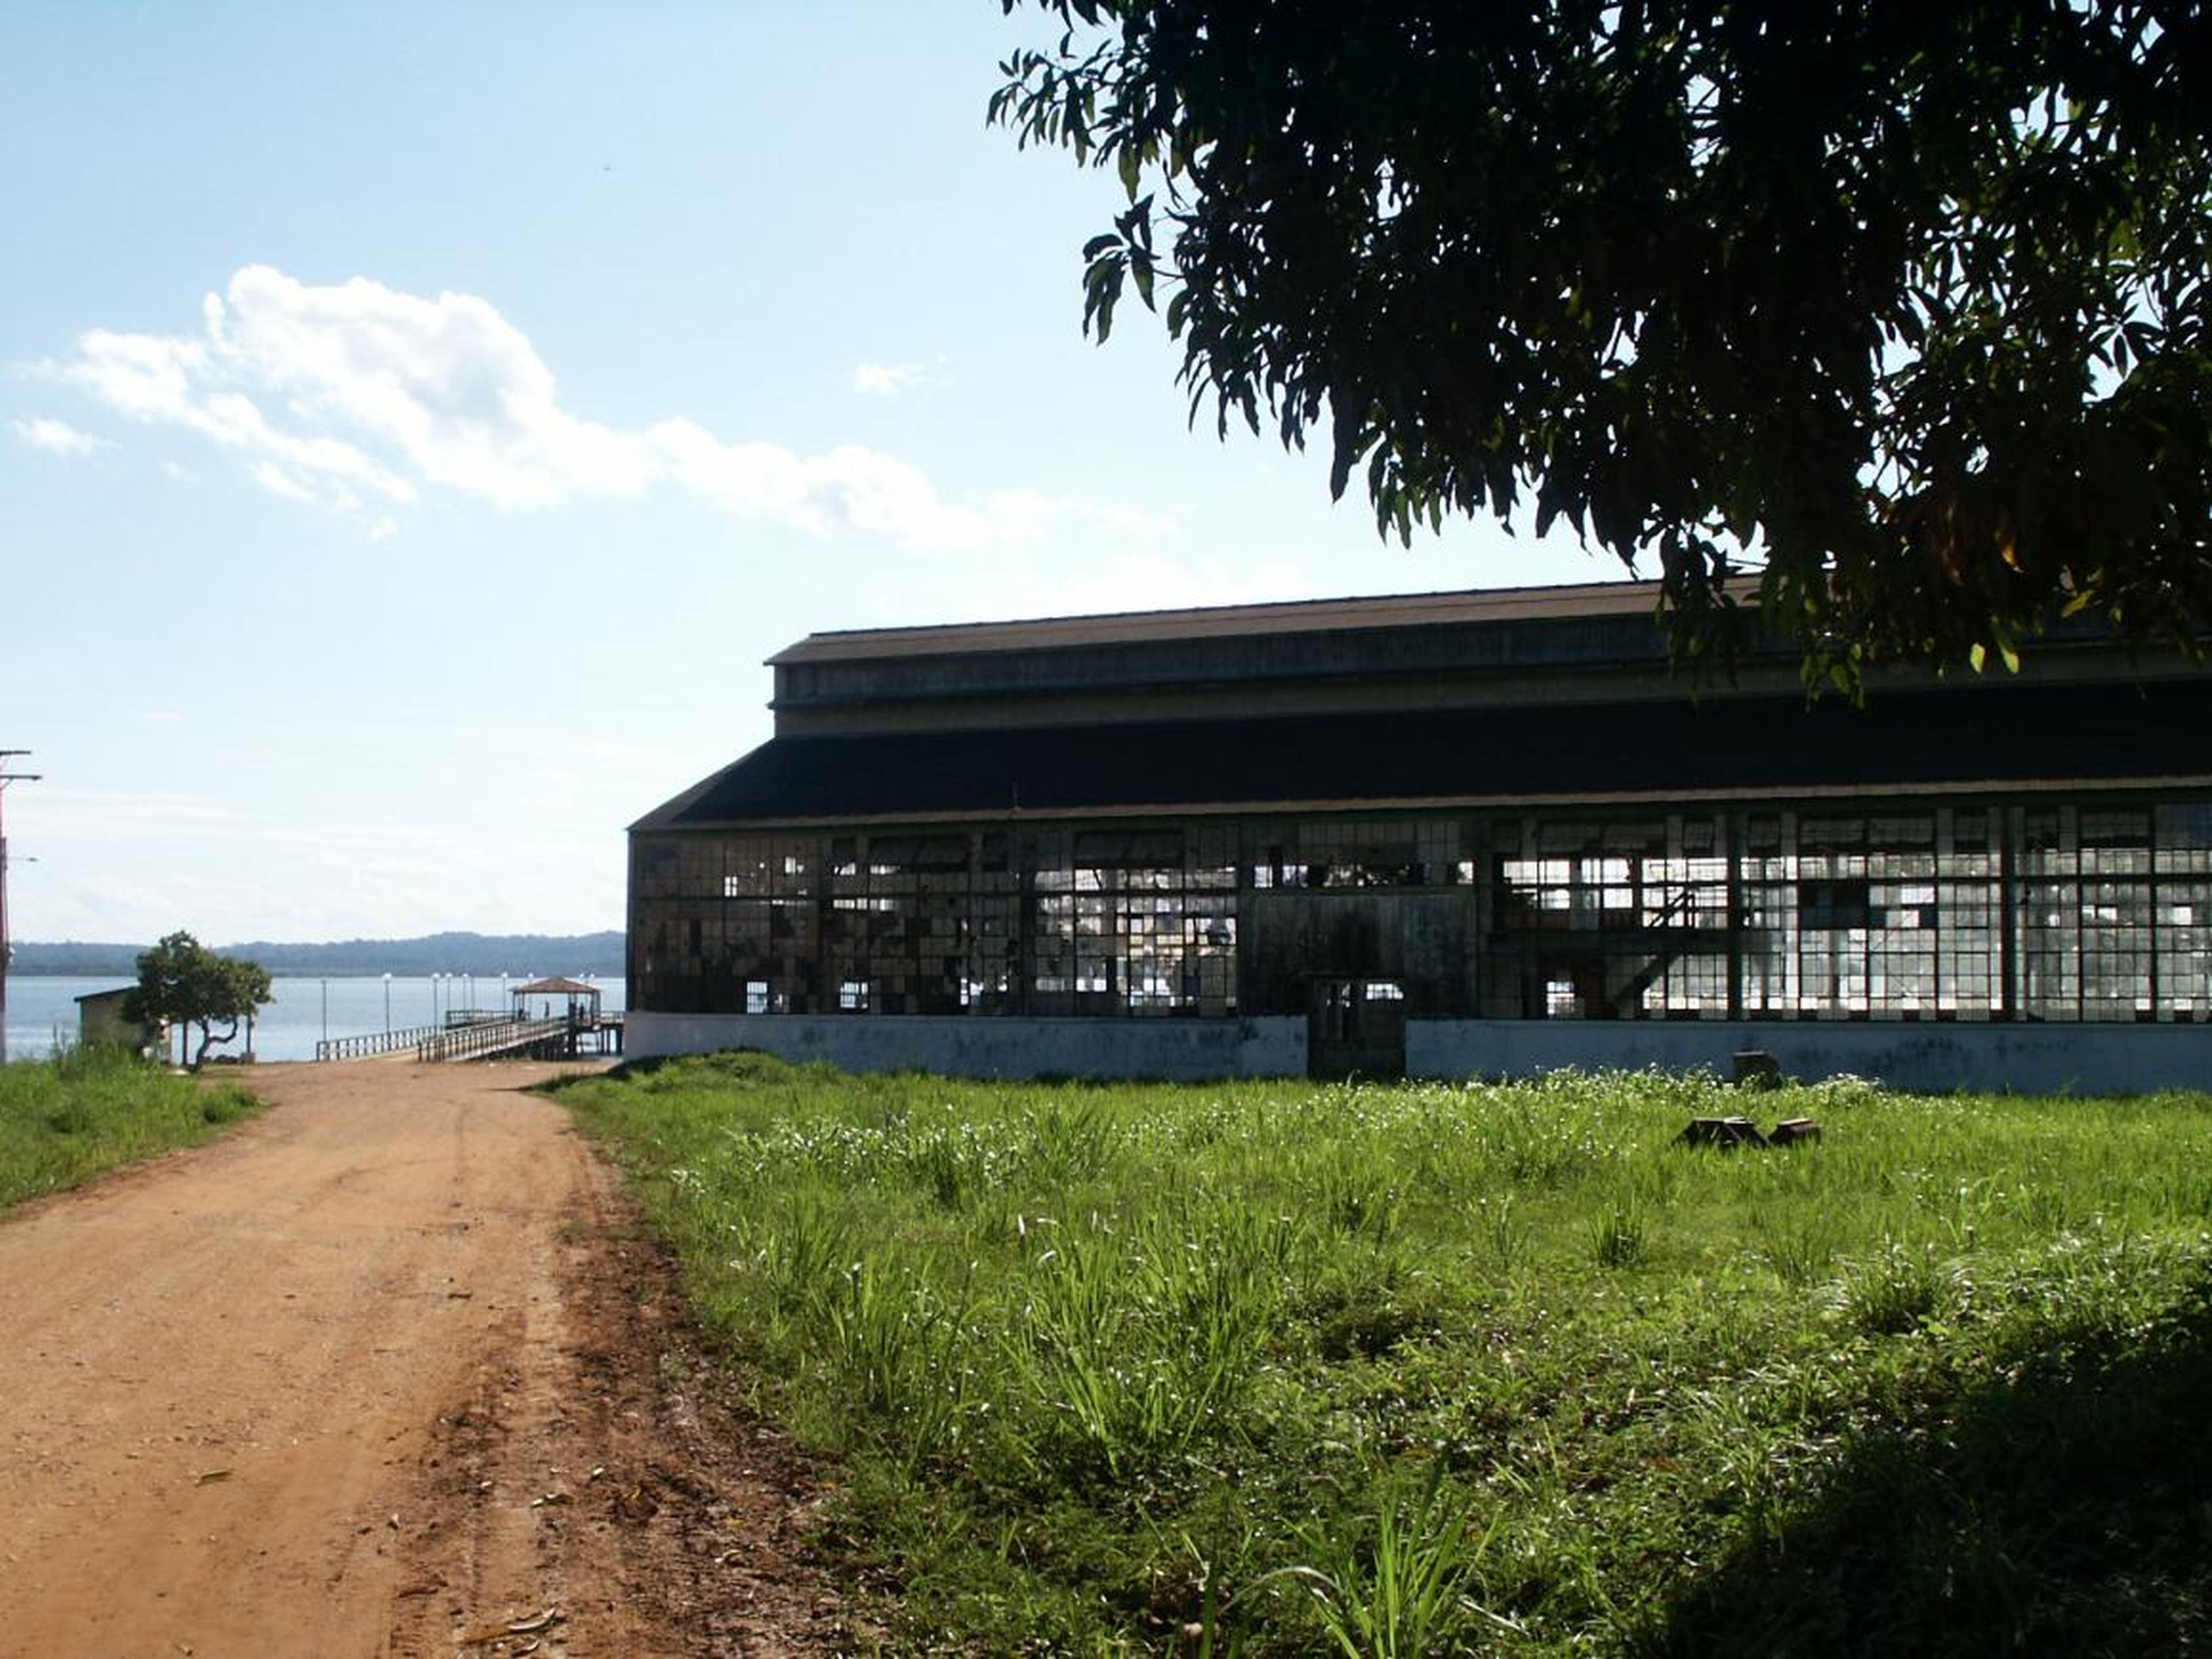 The sawmill in Fordlandia today.